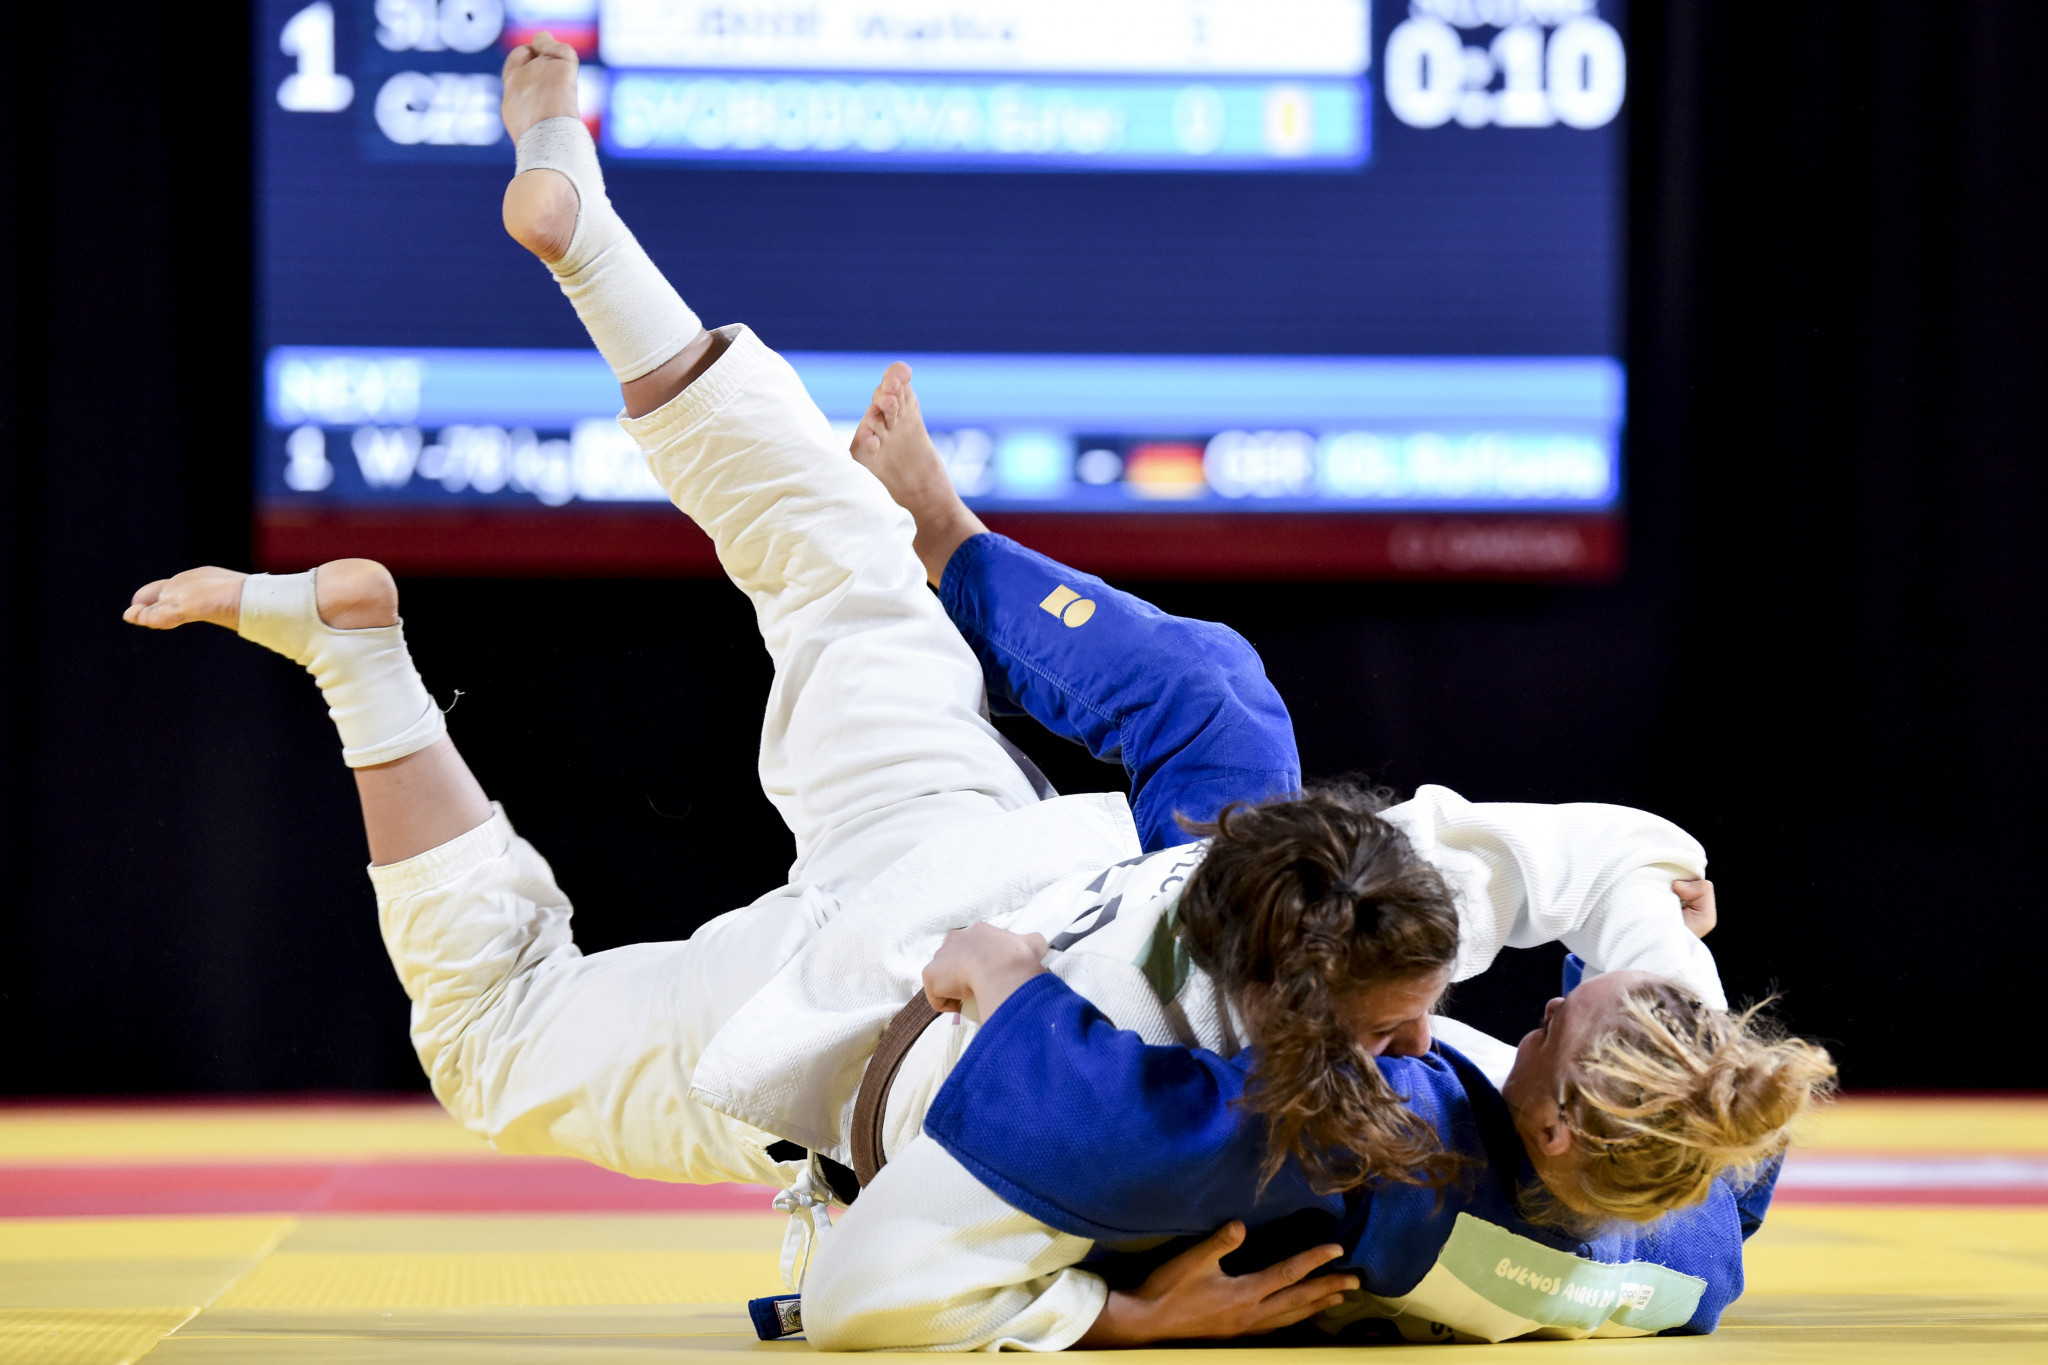 Two judo finals took place on day three at Buenos Aires 2018 ©Getty Images